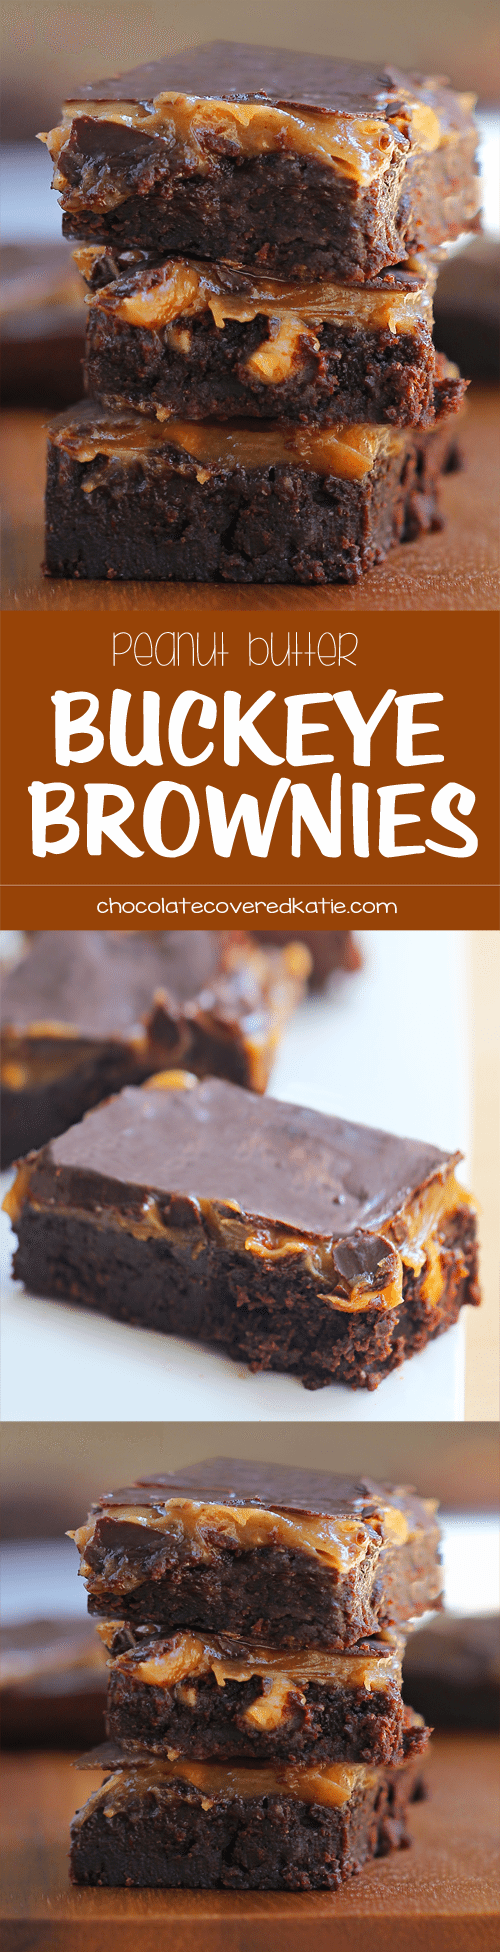 Gooey peanut butter brownies, with a hard chocolate shell - these buckeye brownies from @choccoveredkt are completely irresistible!